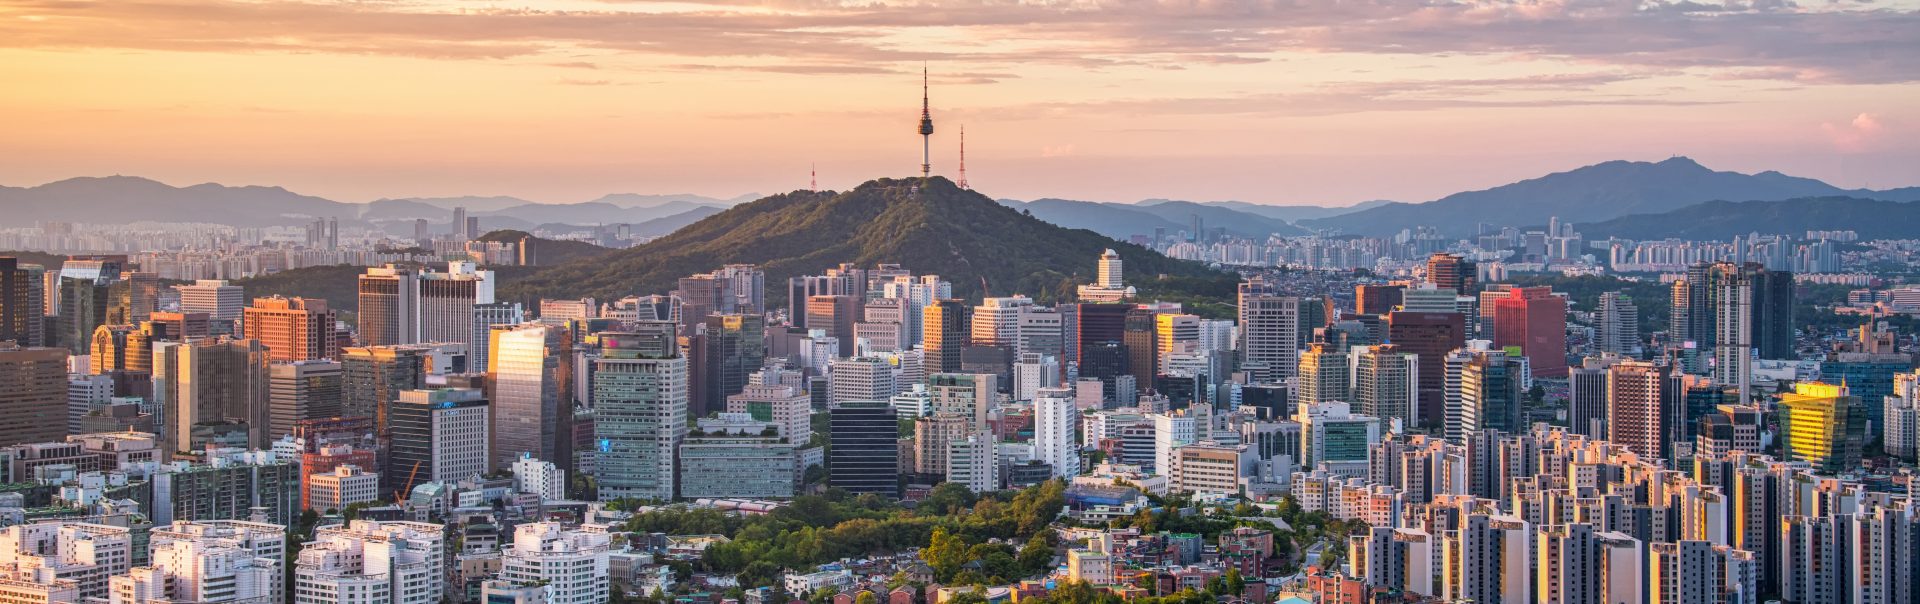 The pictures shows an aerial view of Seoul.